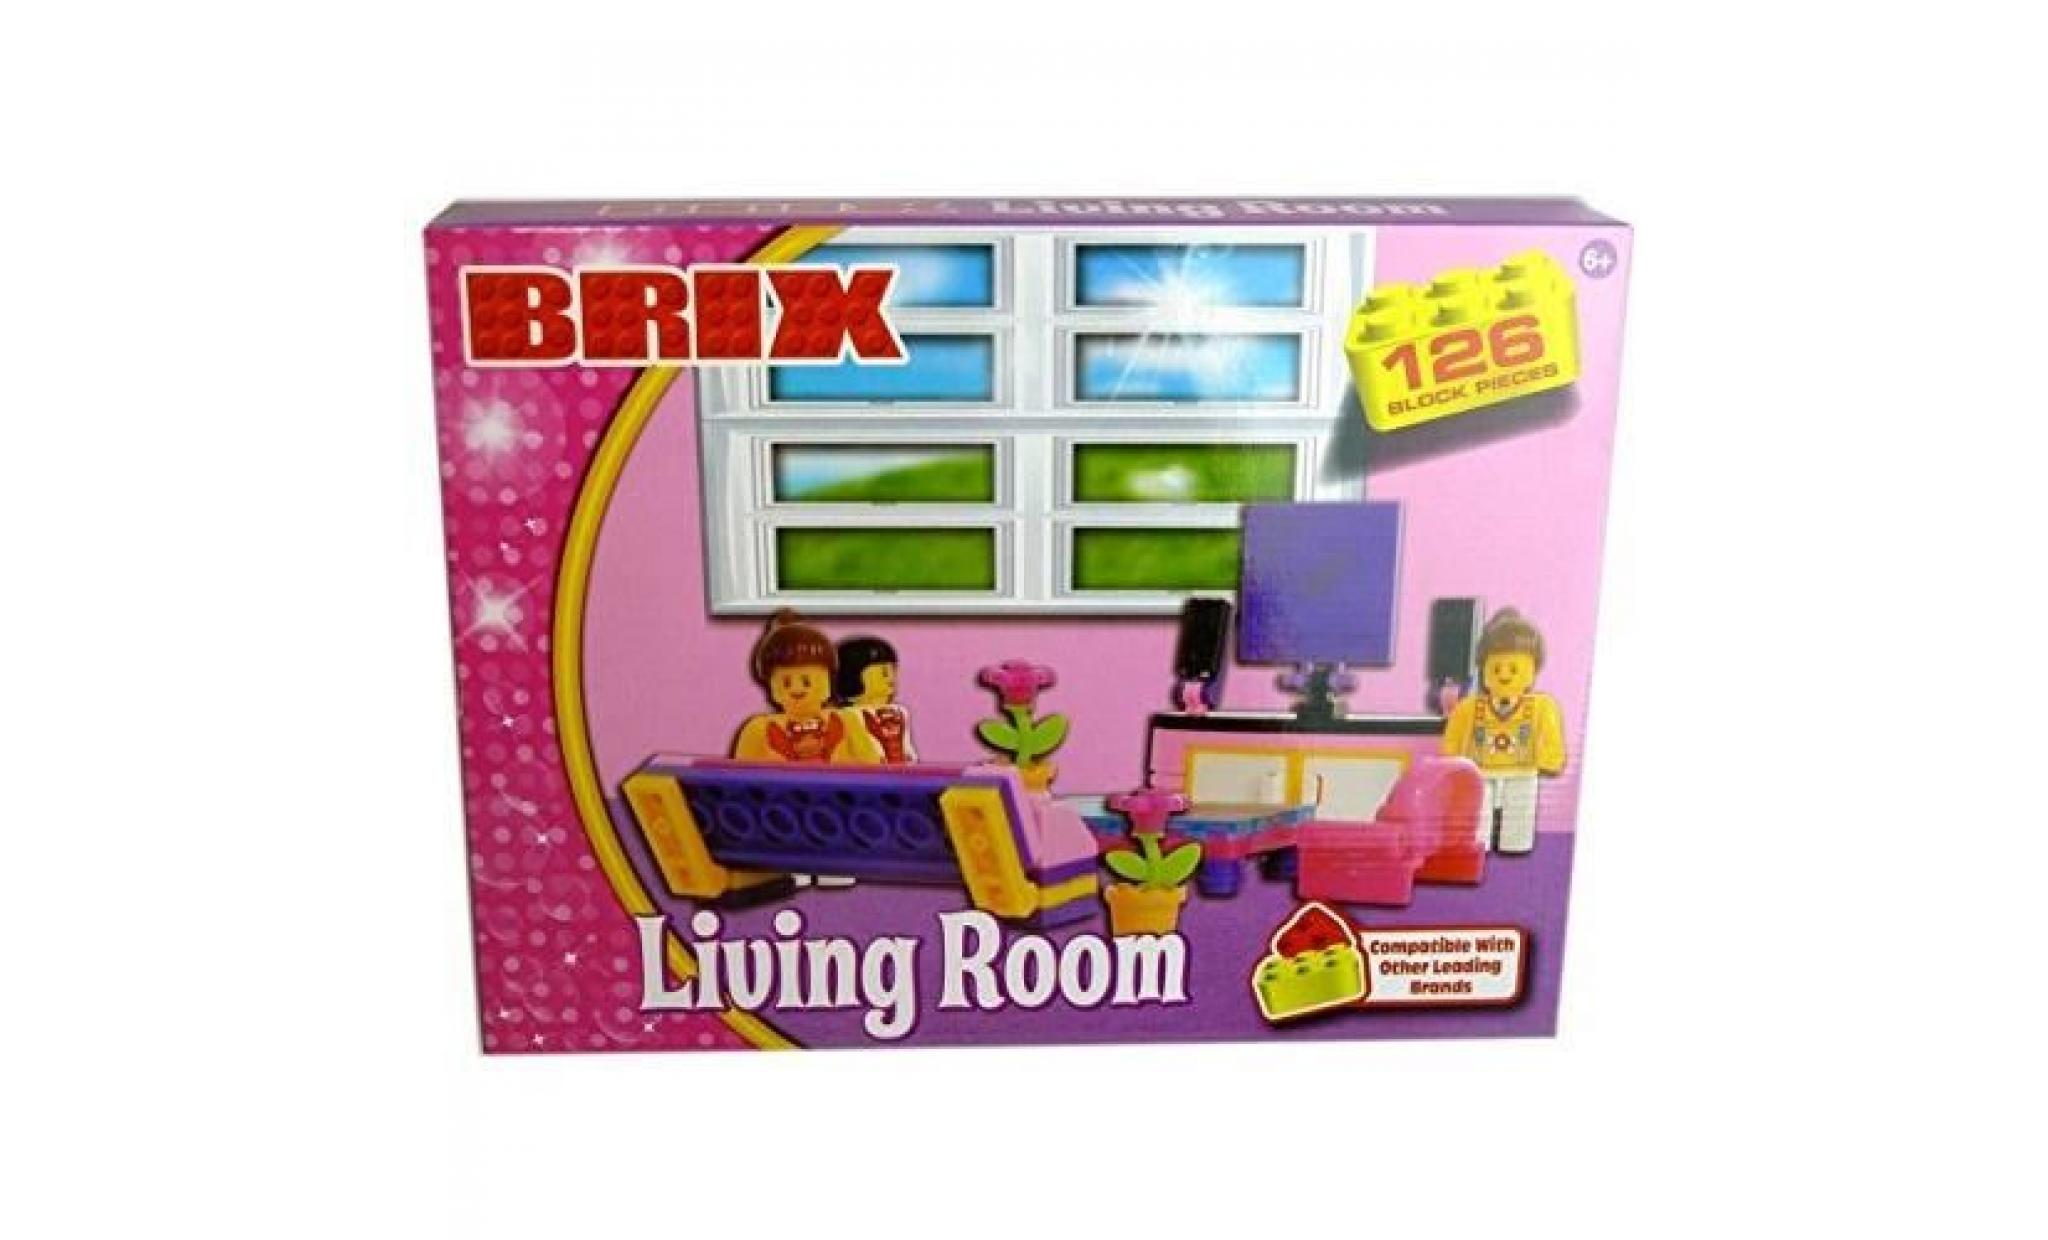 new brix   living room   126 block pieces building create toys sofa tv stand